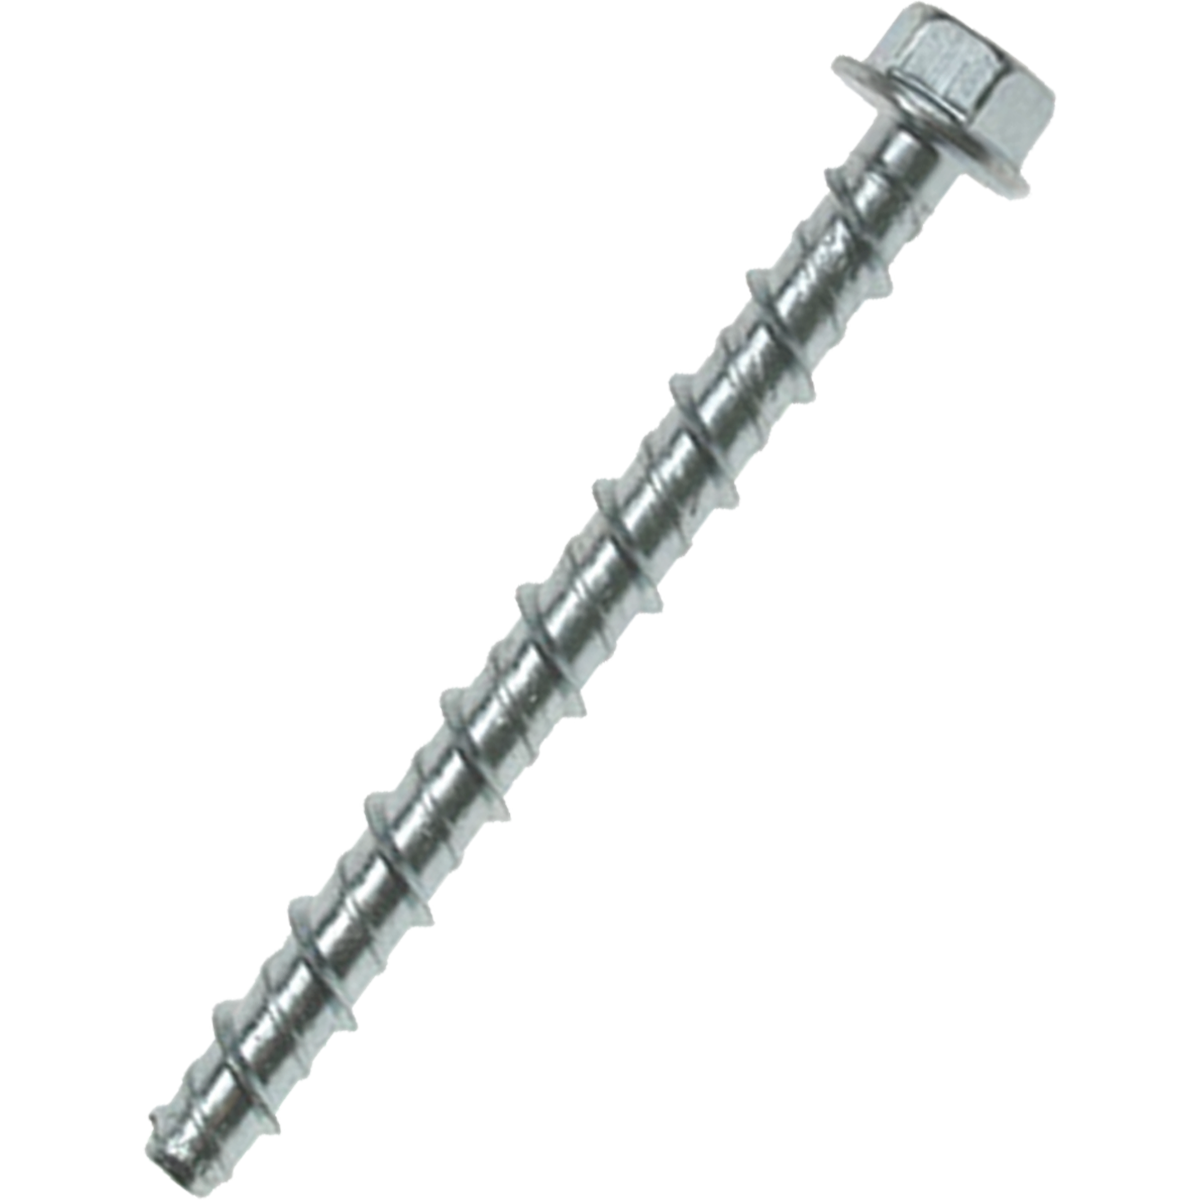 Self tapping Ankerbolts with a flanged hex head at competitive prices.  For use with various materials including concrete, stone, brick, and concrete block.